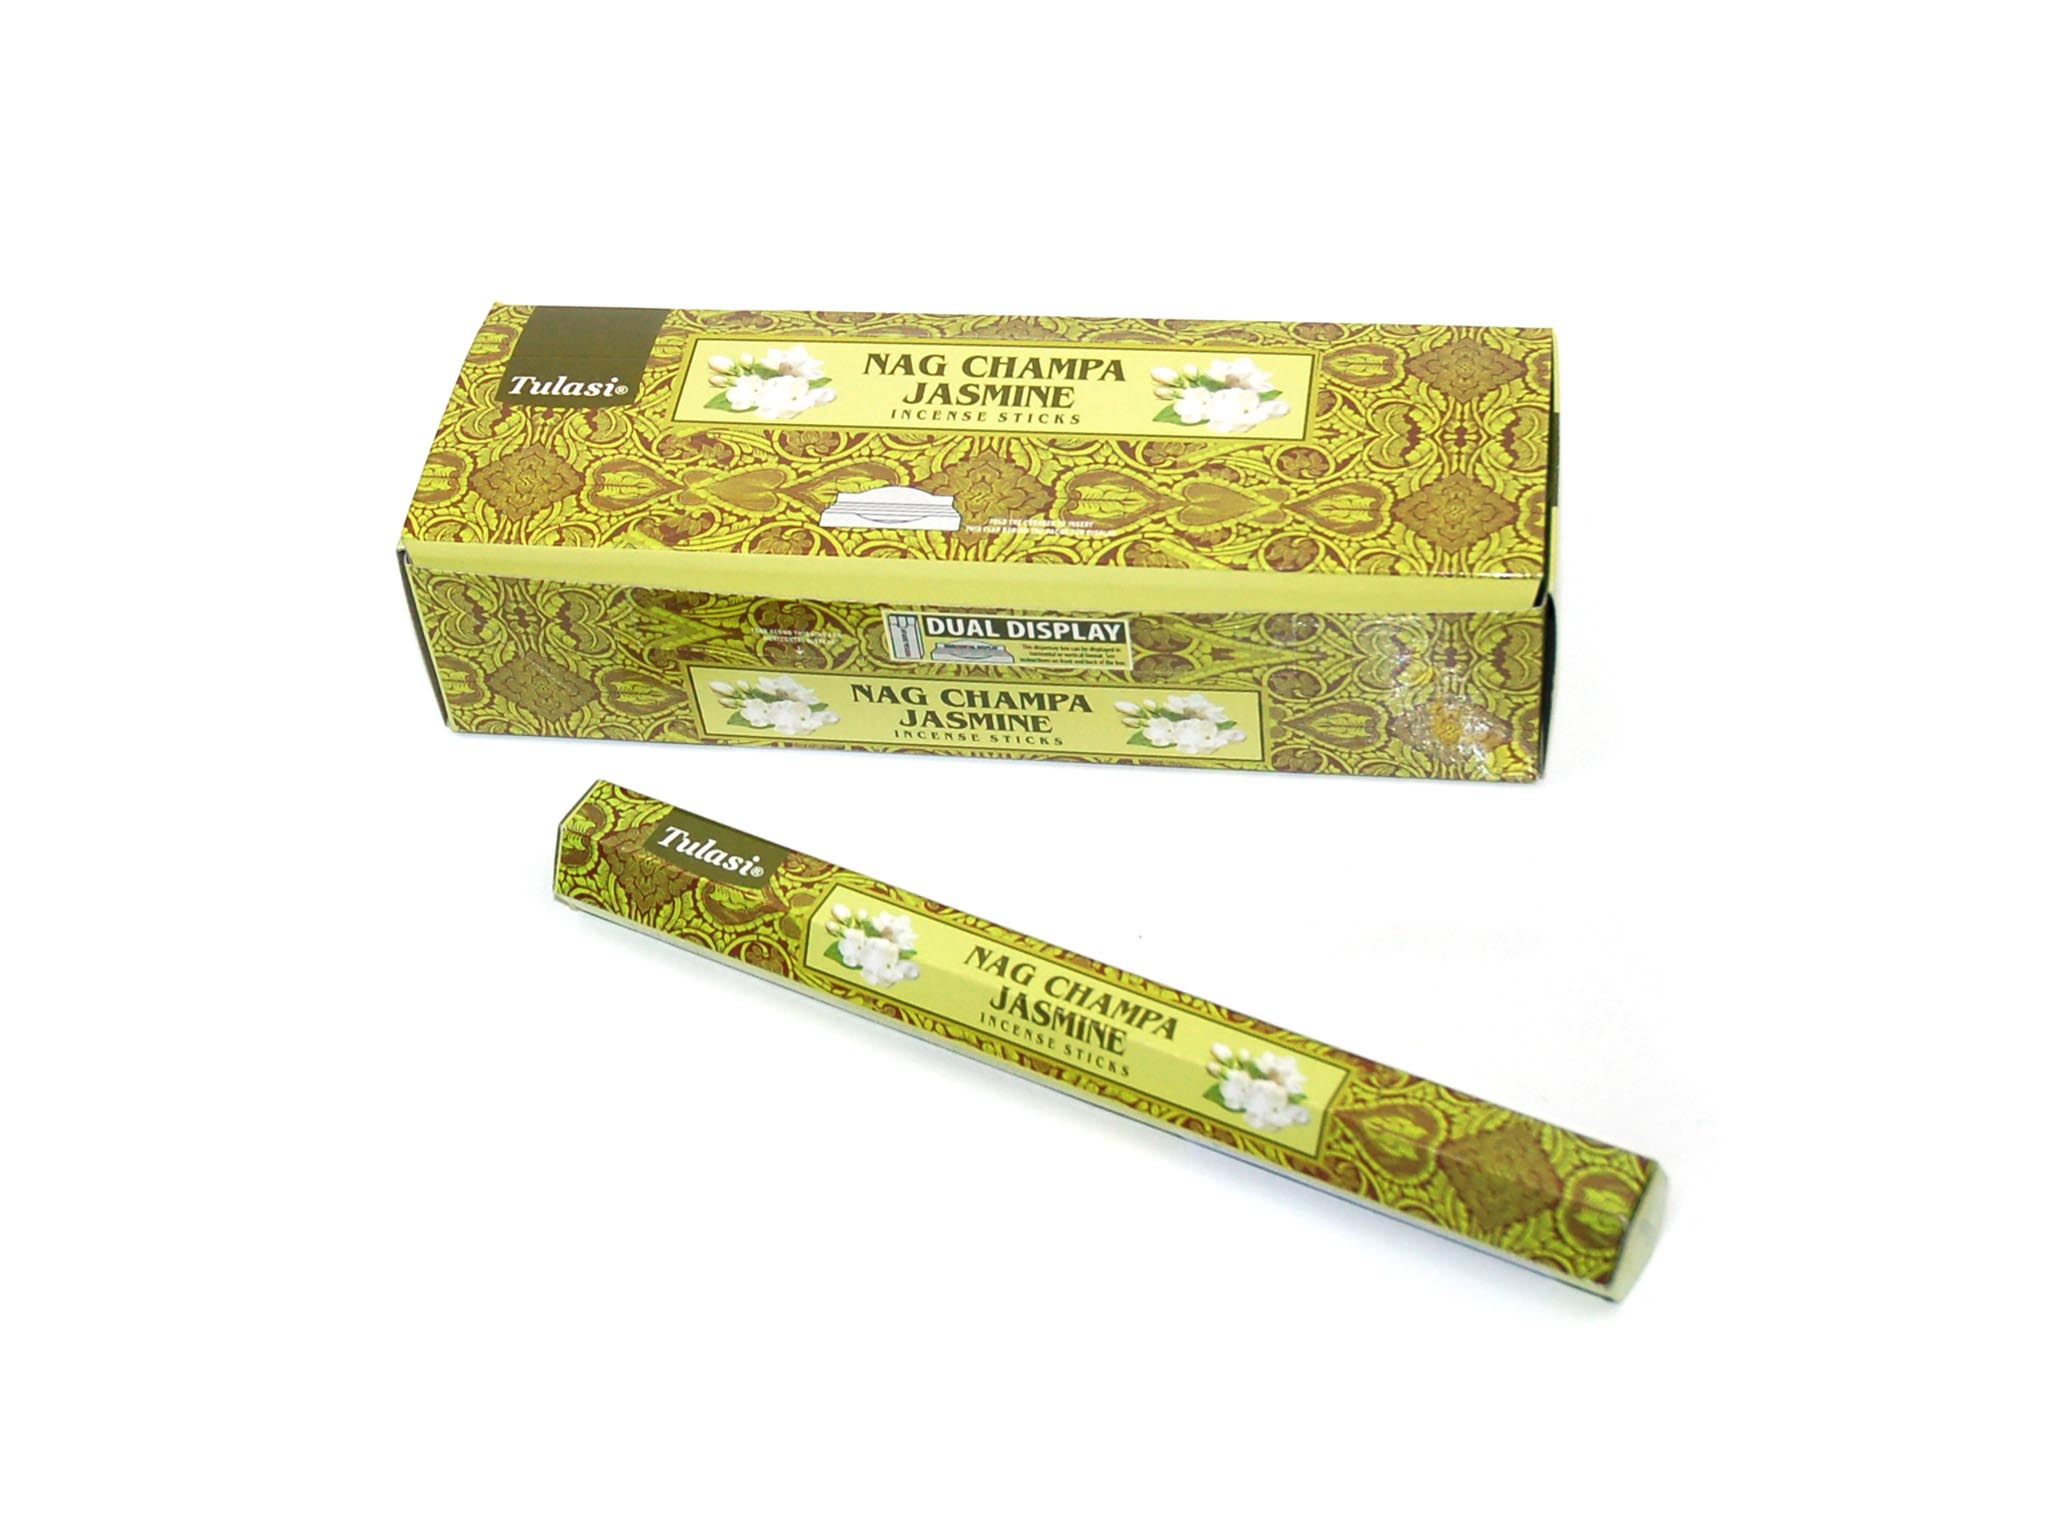 15 STICKS INCENSO NAG CHAMPA GELSOMINO cod. 3400614